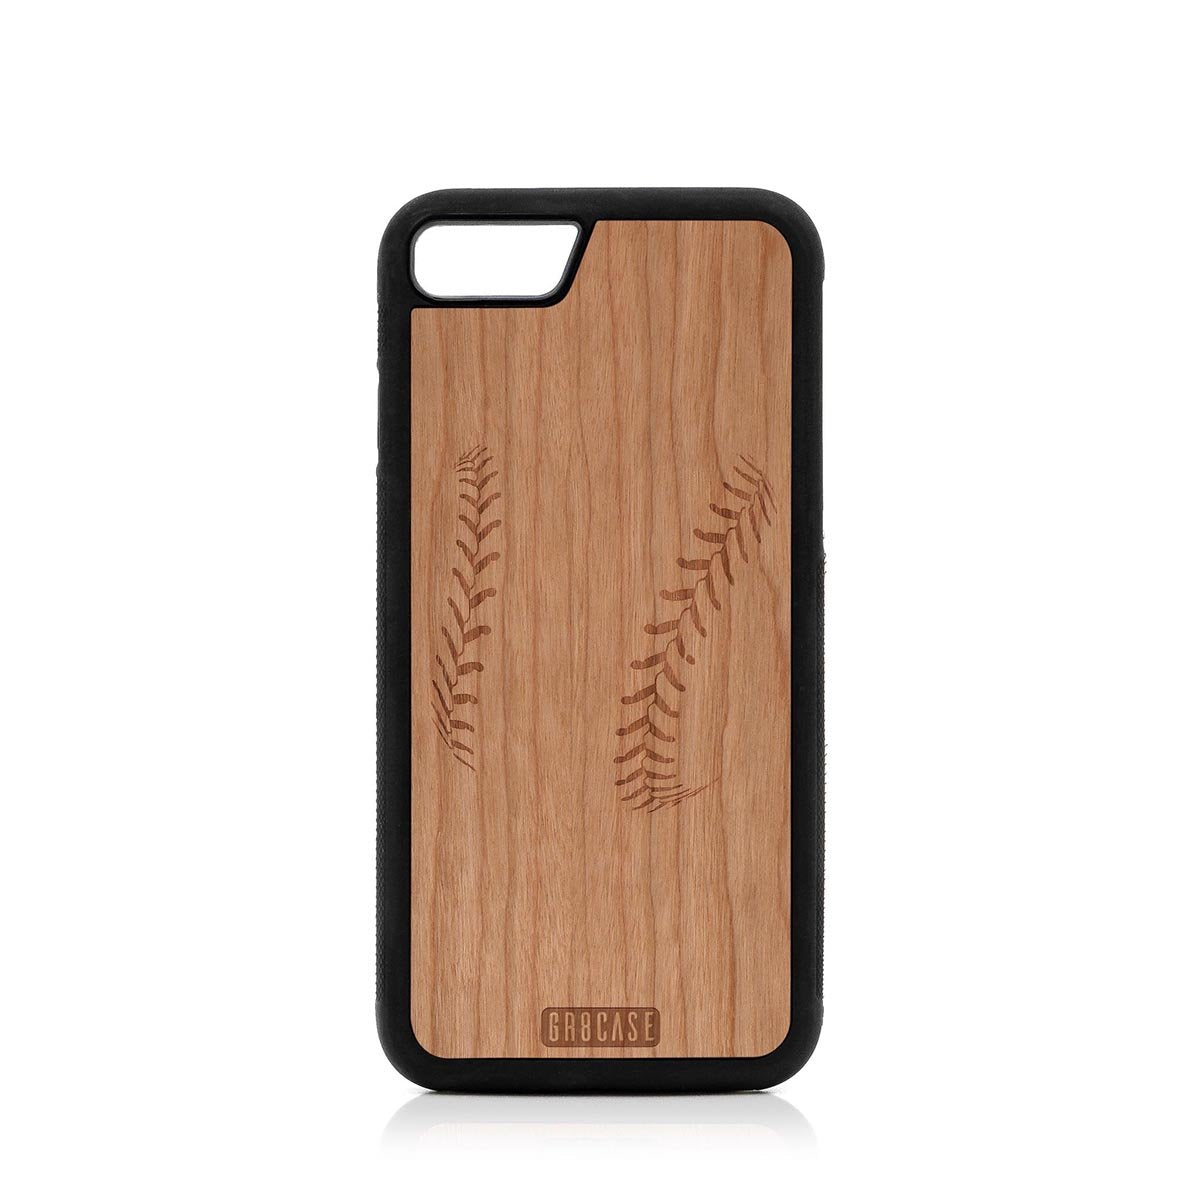 Baseball Stitches Design Wood Case For iPhone SE 2020 by GR8CASE